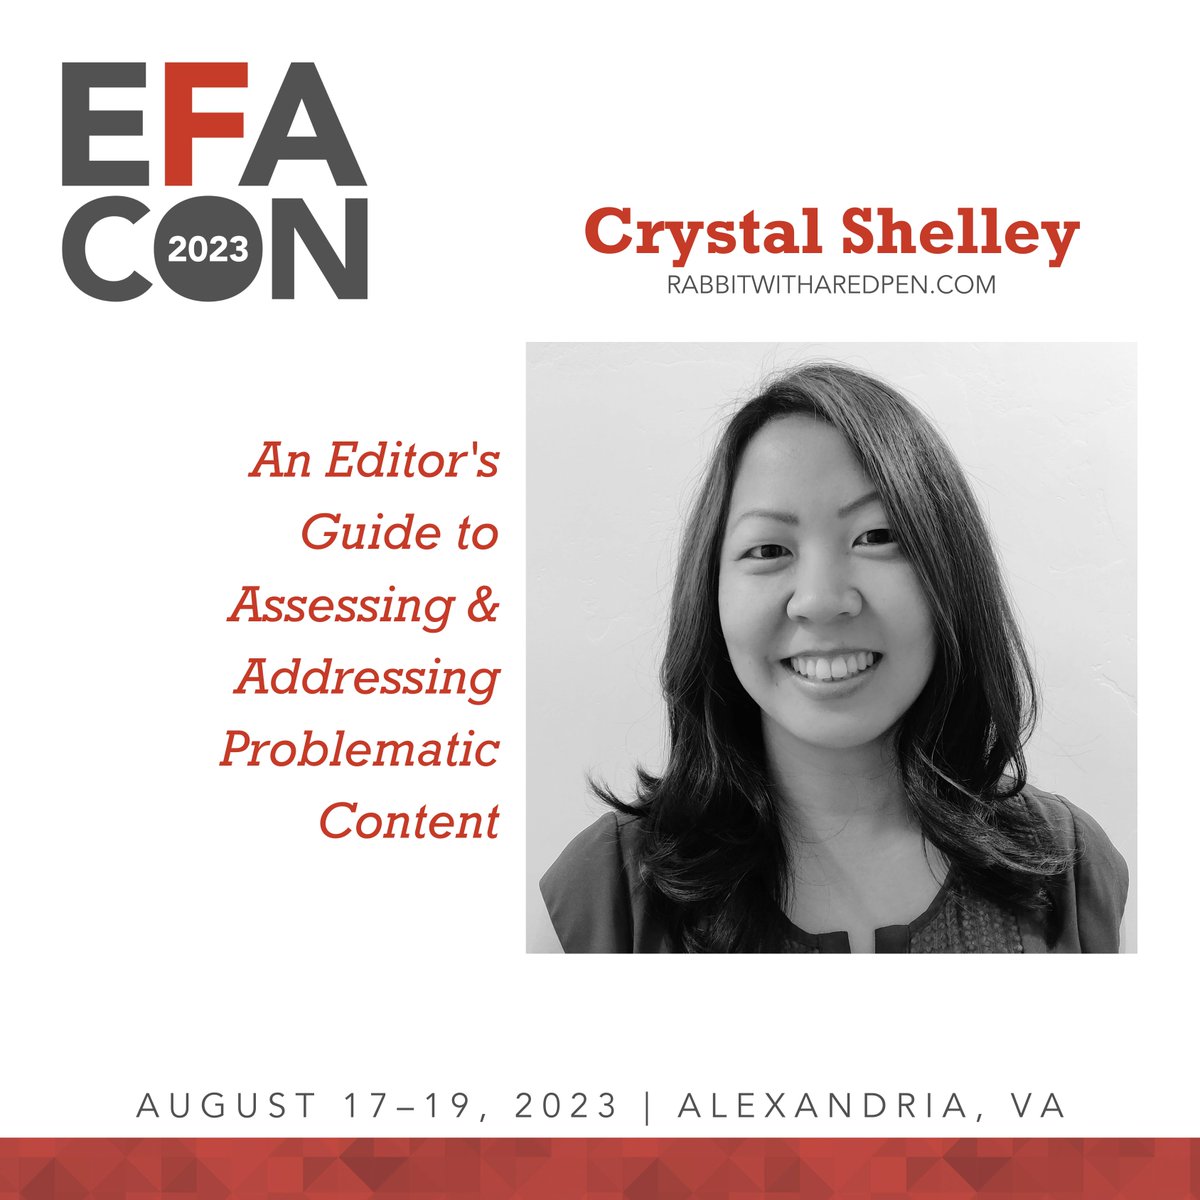 I'm heading off to #EFACON2023 today! I'll be touring parts of DC, debuting a new presentation called 'An Editor's Guide to Assessing and Addressing Problematic Content,' and seeing lots of edibuddies. ❤️ 

If you see me, please stop me and say hi!